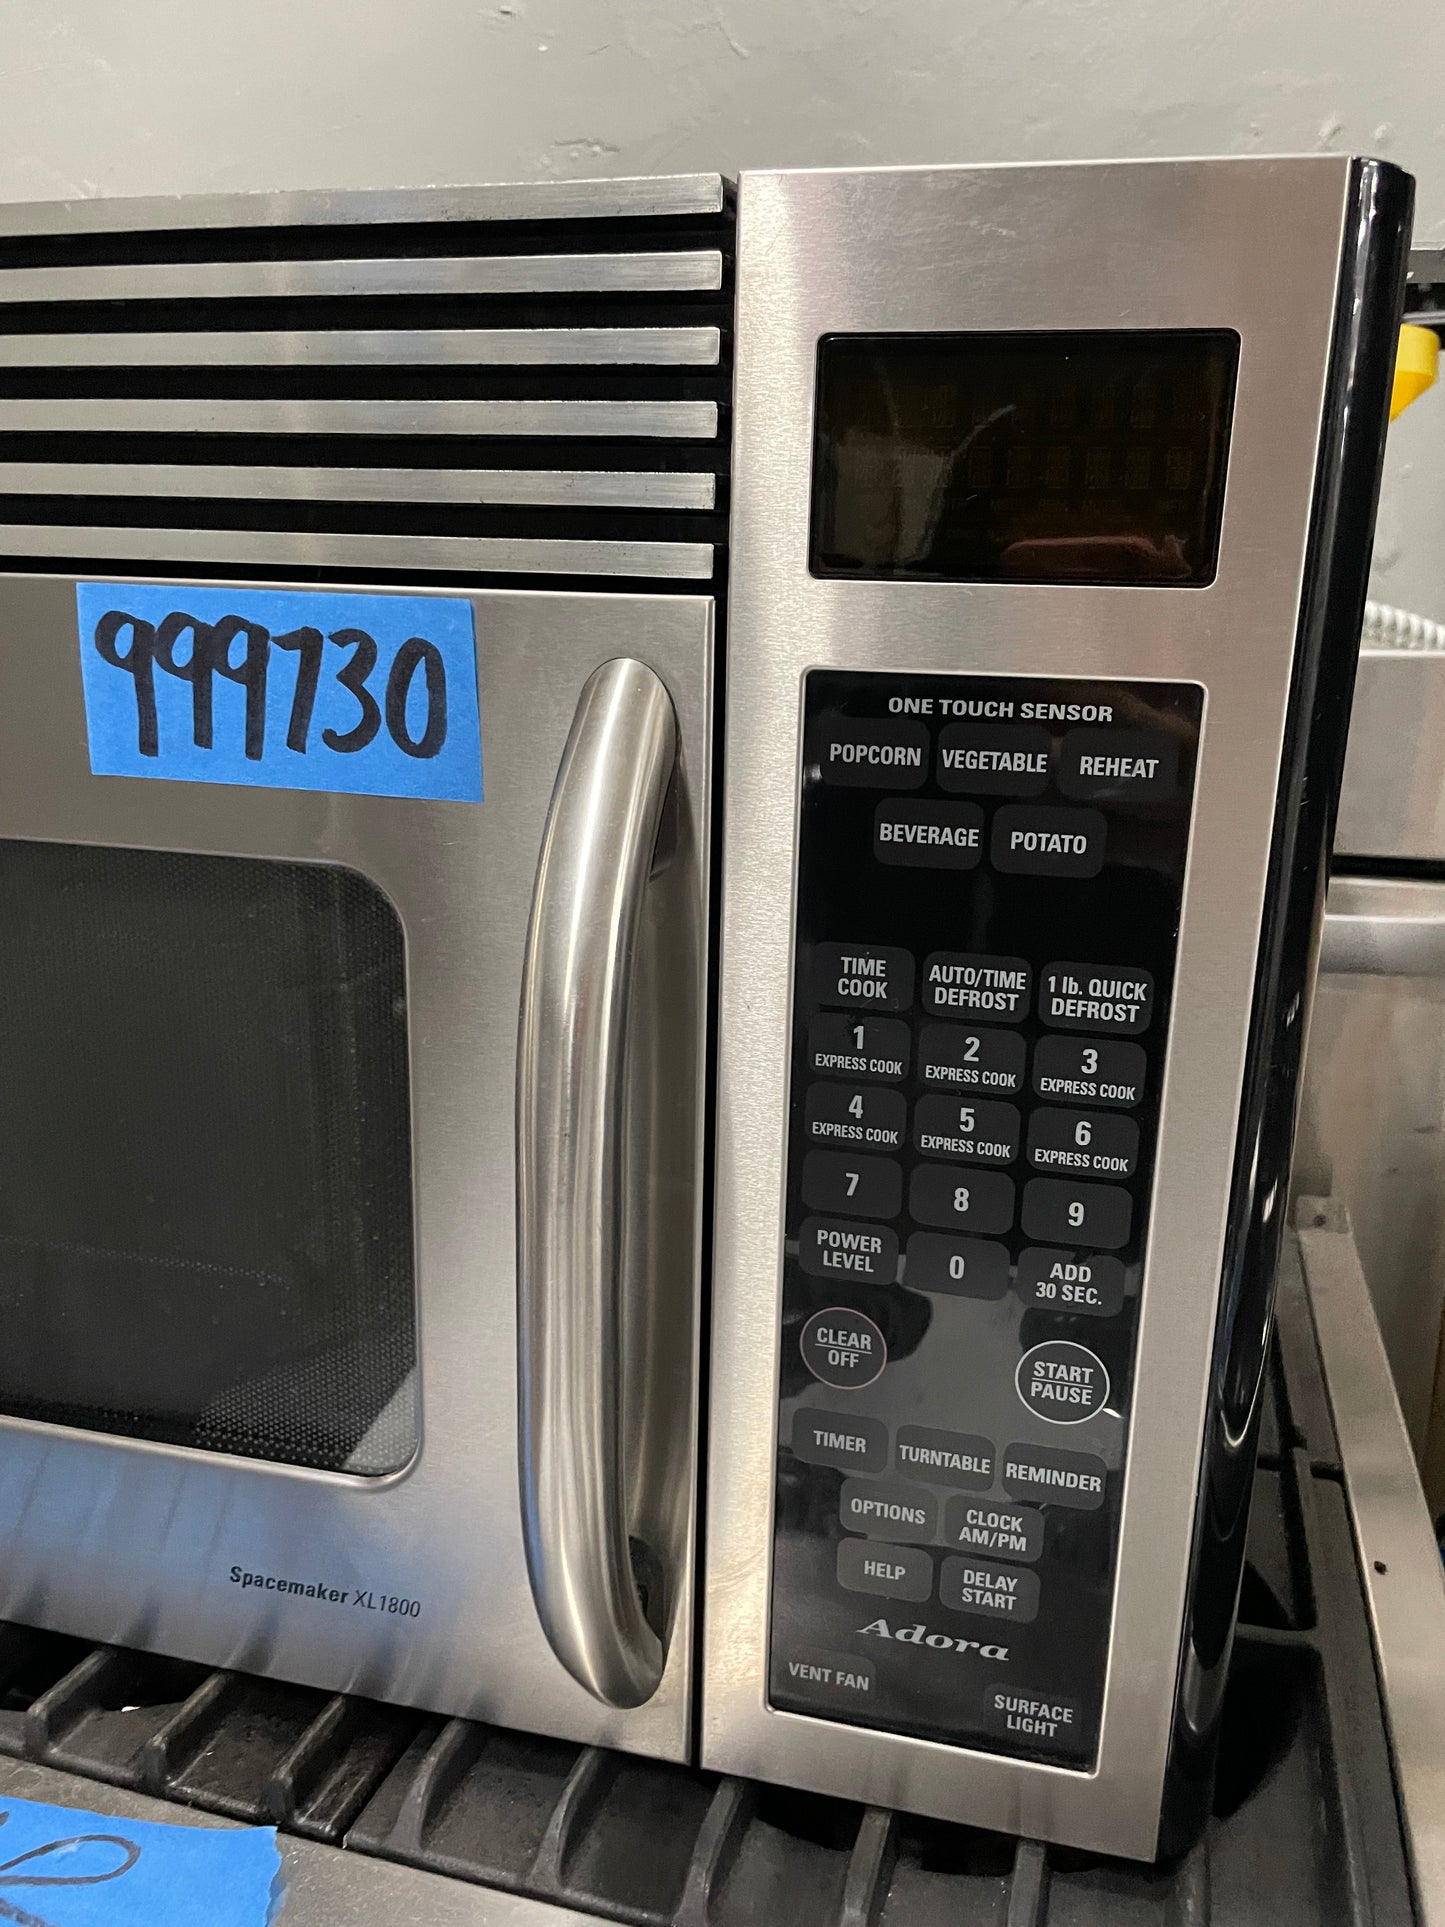 GE 1.7 Cu.Ft Over The Range Microwave in Stainless Steel, HDM1853SJ02, 999730